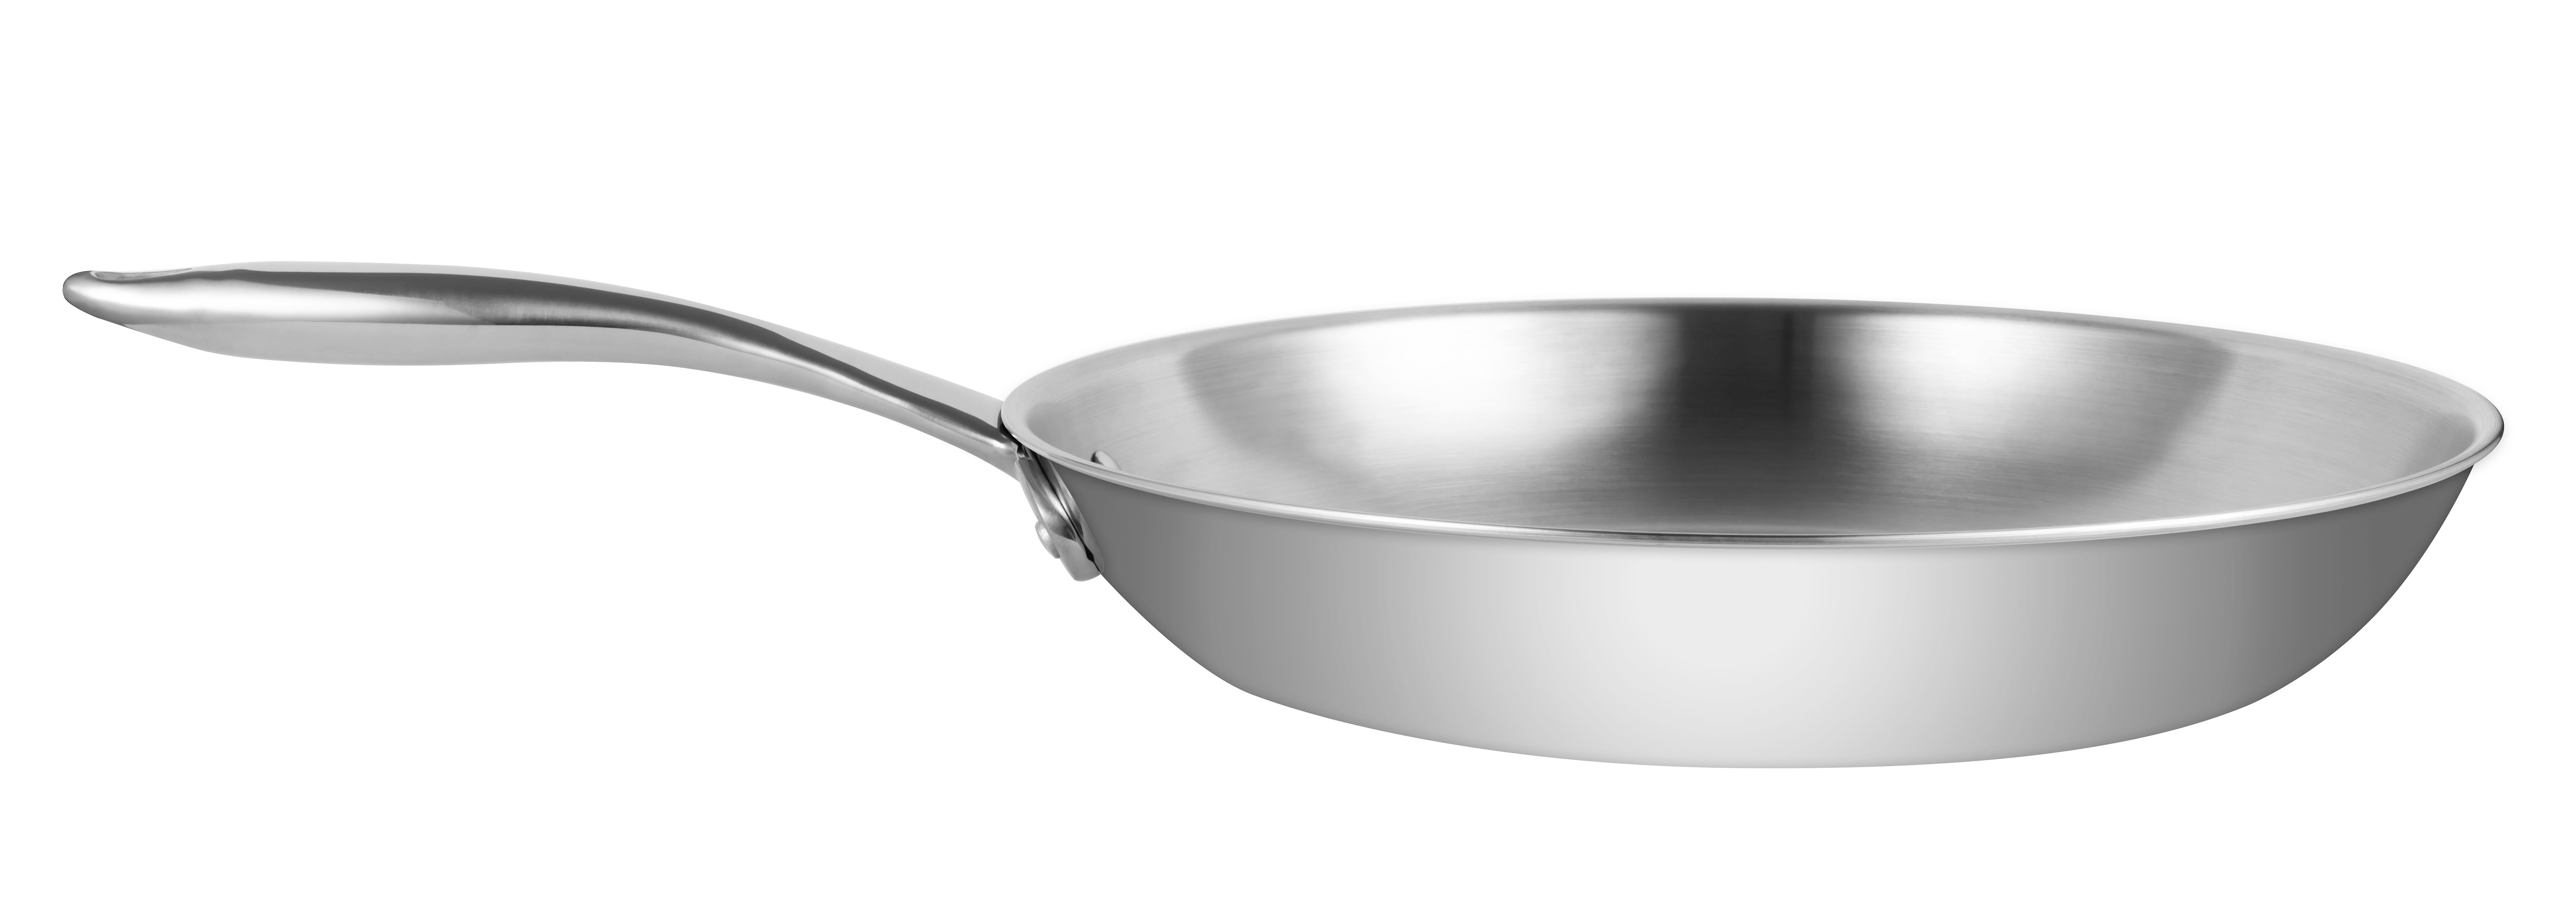 The Stainless Steel All-In-One Sauce Pan by Ozeri, 100% APEO